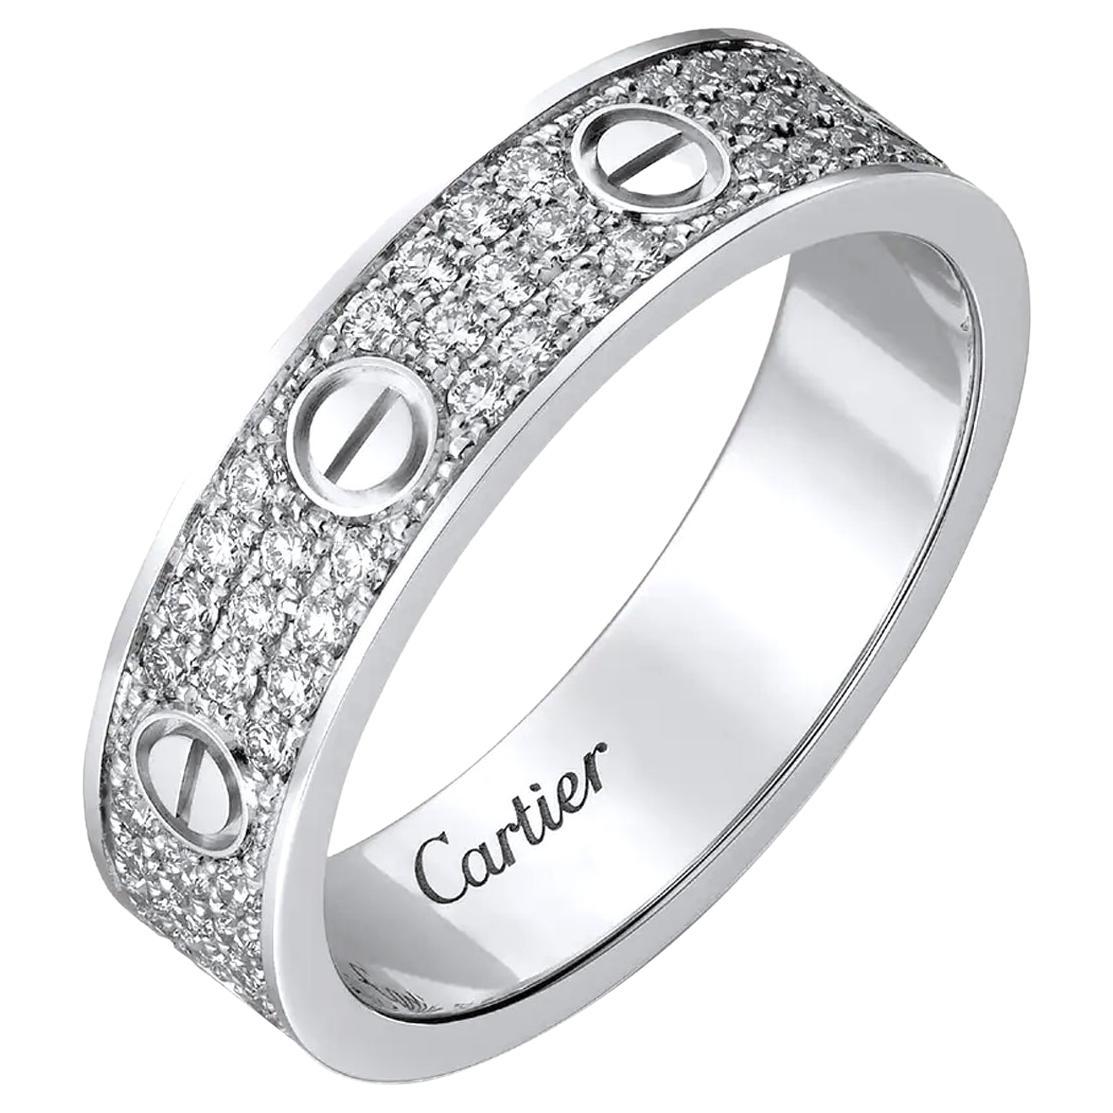 Cartier Love Wedding Band Brilliant-Cut Diamond-Paved 18K White Gold Ring